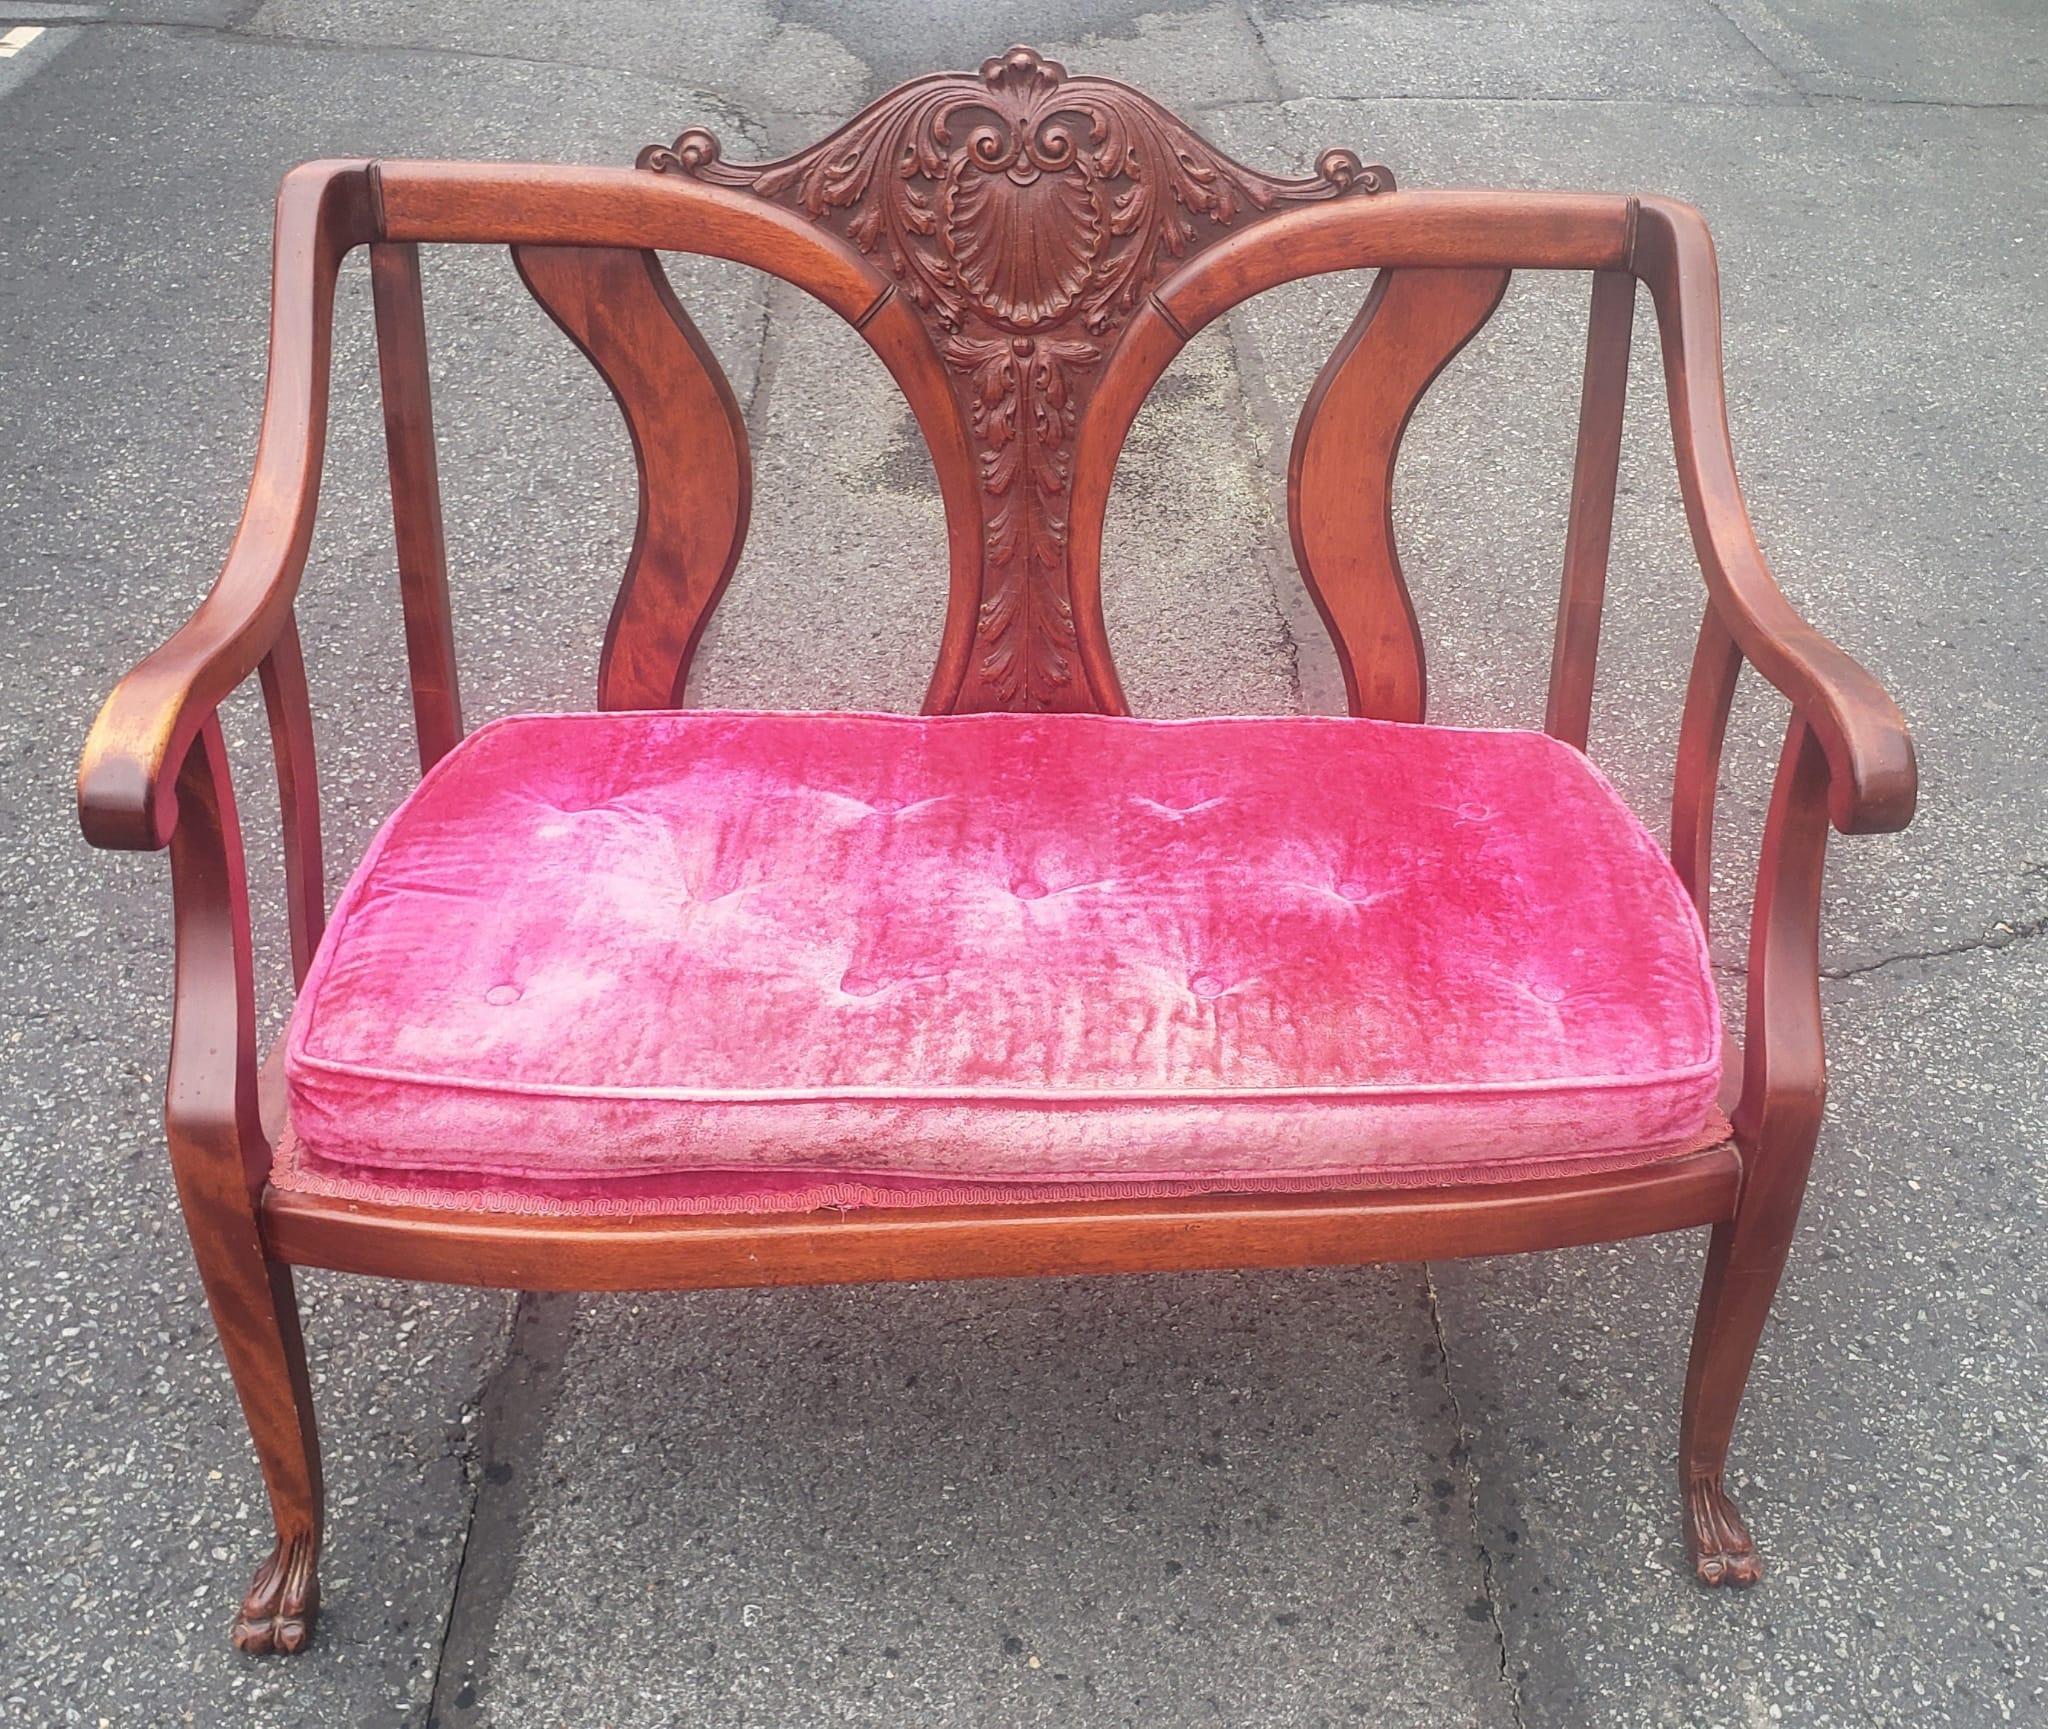 An Early 20th Century Victorian Style Carved Mahogany and Upholstered Settee with impressive center back carving.
Measures 41